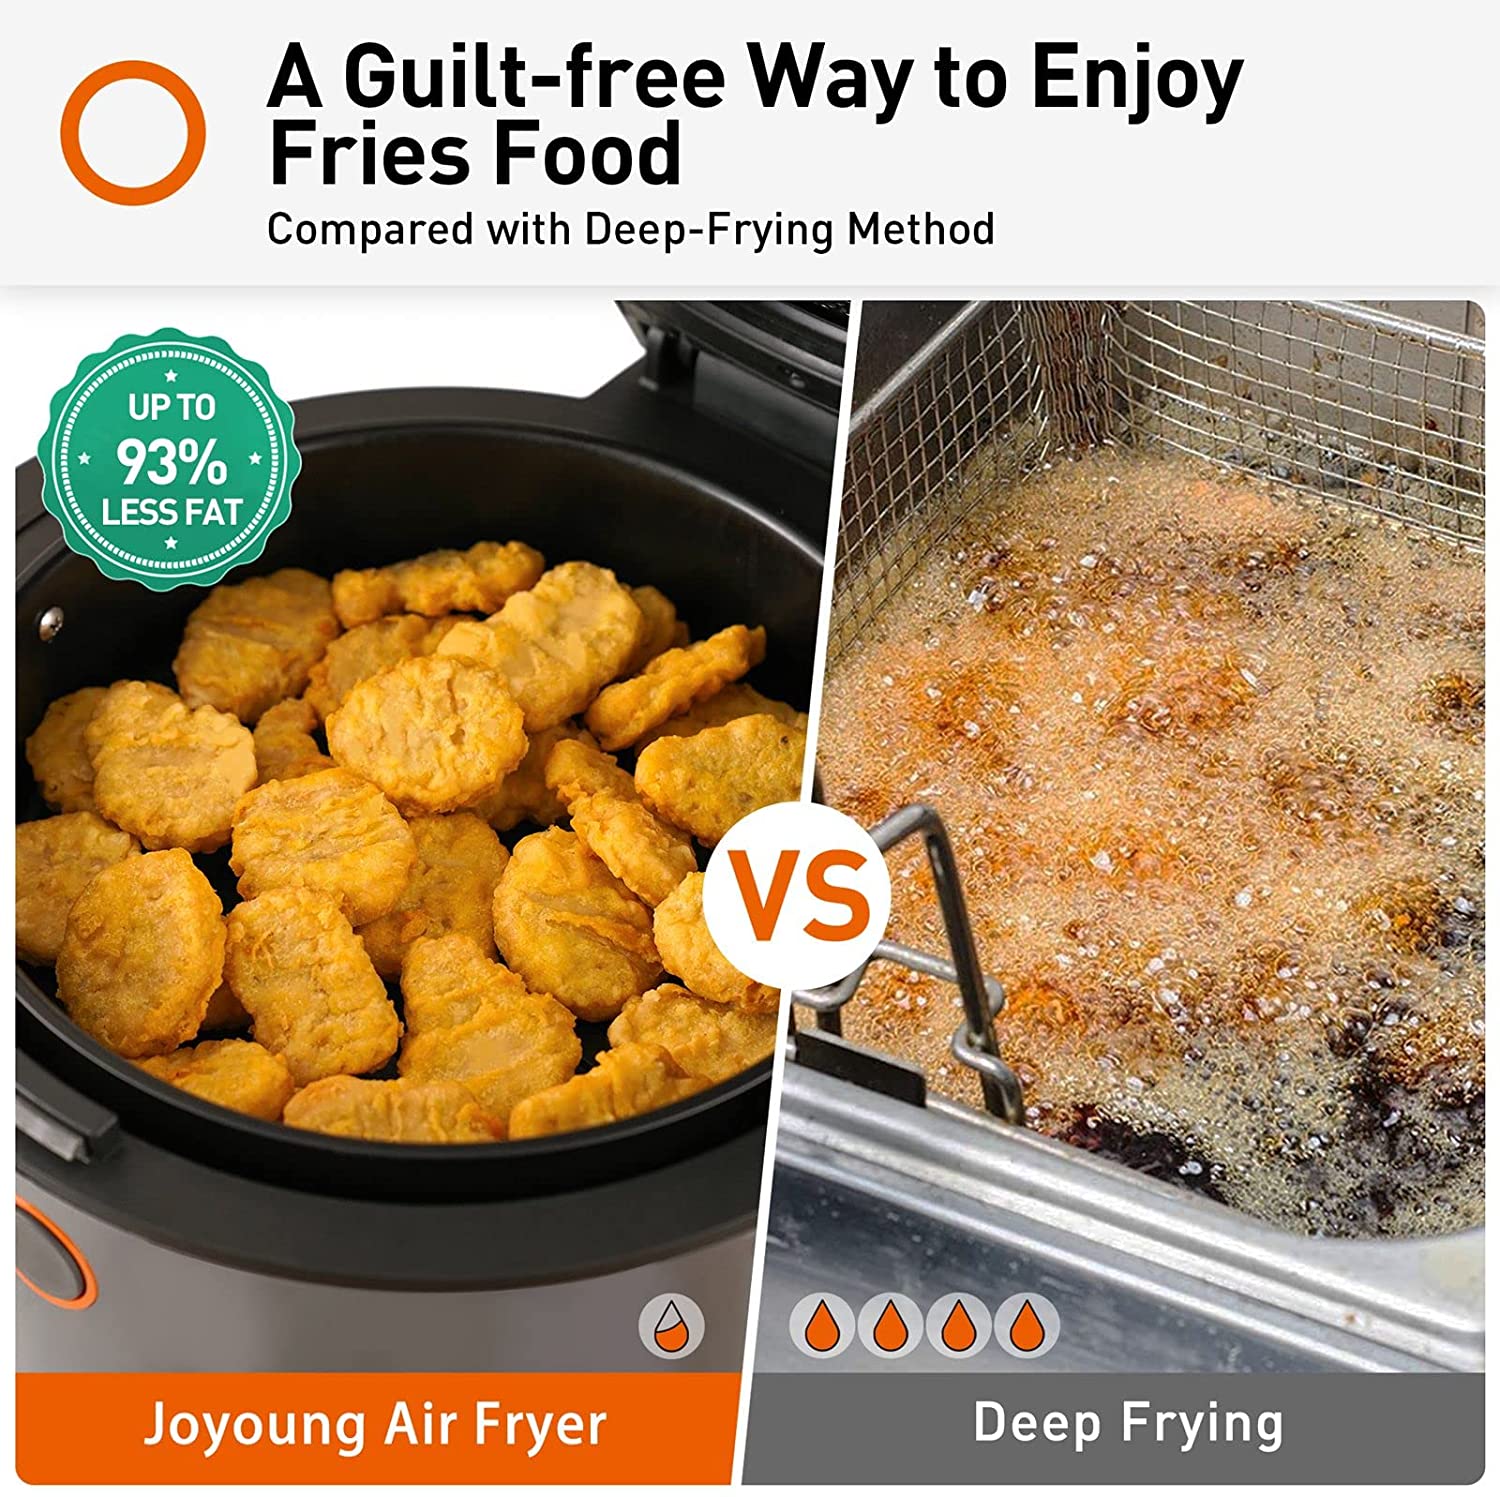 JOYOUNG Air Fryer 10 in 1 Digital Air Fryer Oven 5.8 QT Air Fryer Toaster Oven Oilless Cooker 120° Visible Window Free Recipes